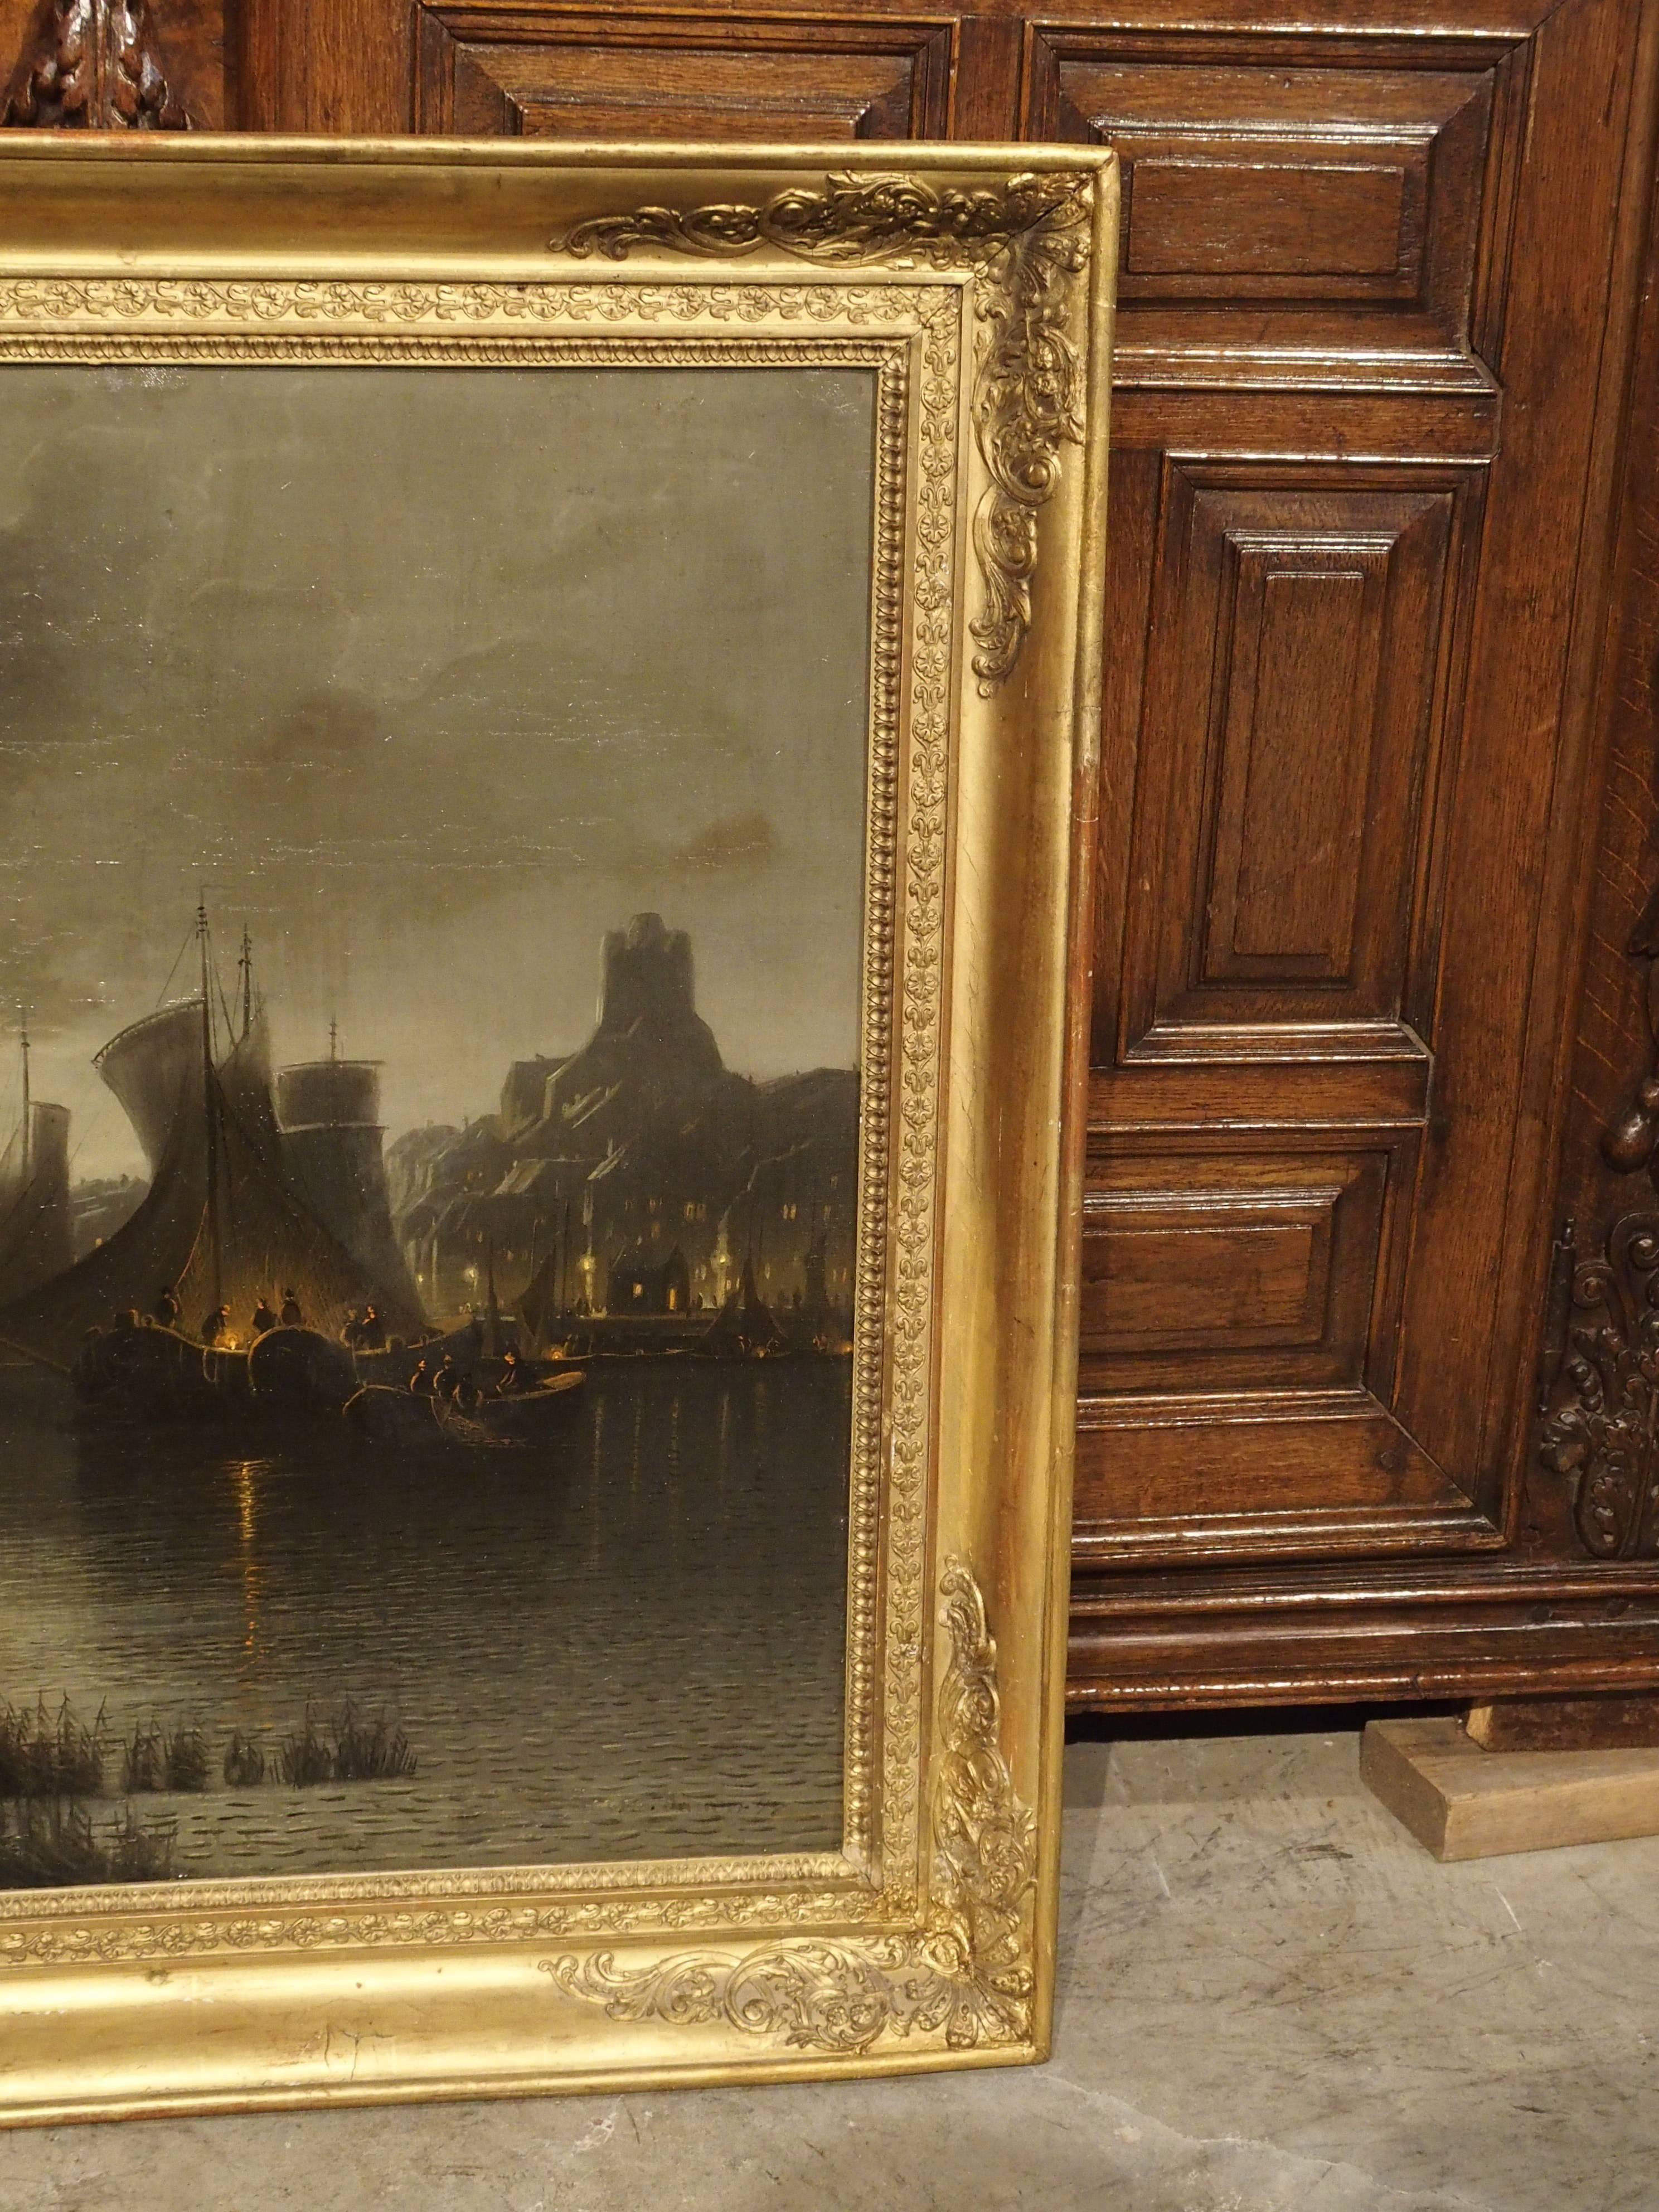 This appealing antique French Oil Painting depicts a night time harbor scene.  The moon is passing through some large dark clouds in the sky and highlighting the gently rippling waters of the wetlands and harbor. On the far right hand side, is a